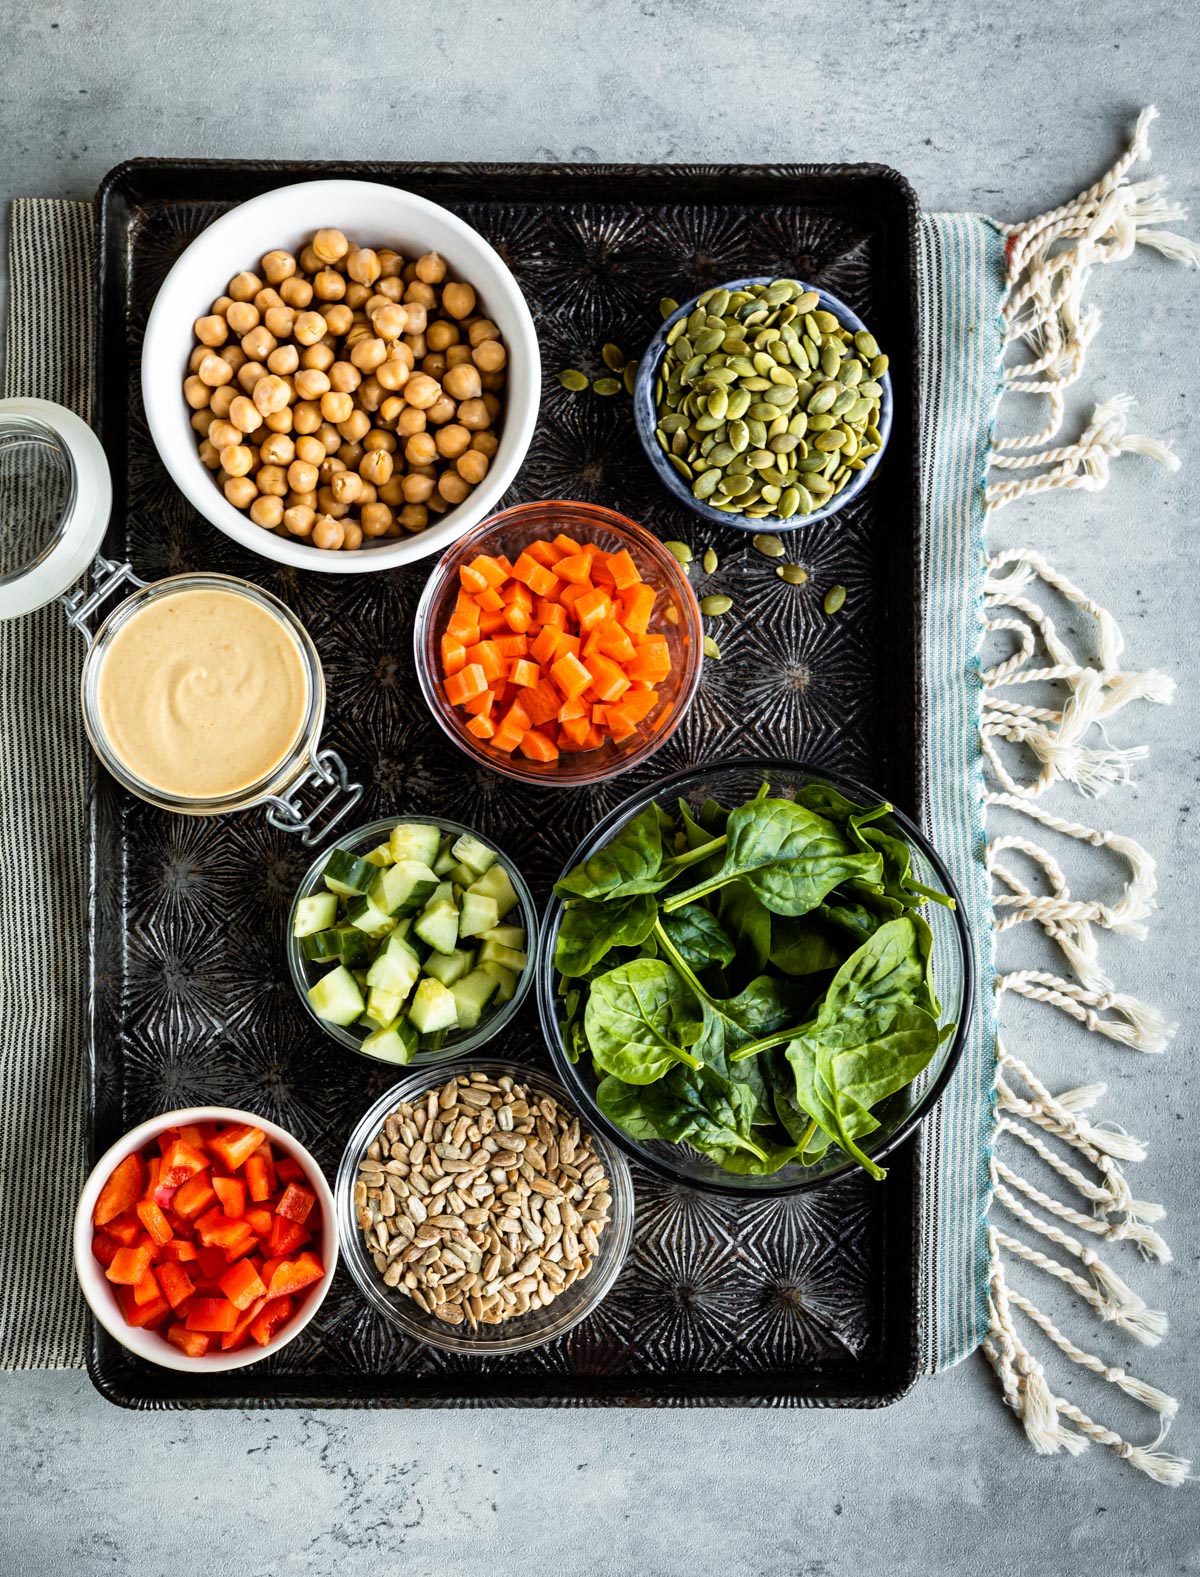 ingredients for a crunchy salad including chickpeas, pumpkin seeds, carrots, tahini dressing, spinach, cucumber, sunflower seeds and red pepper.